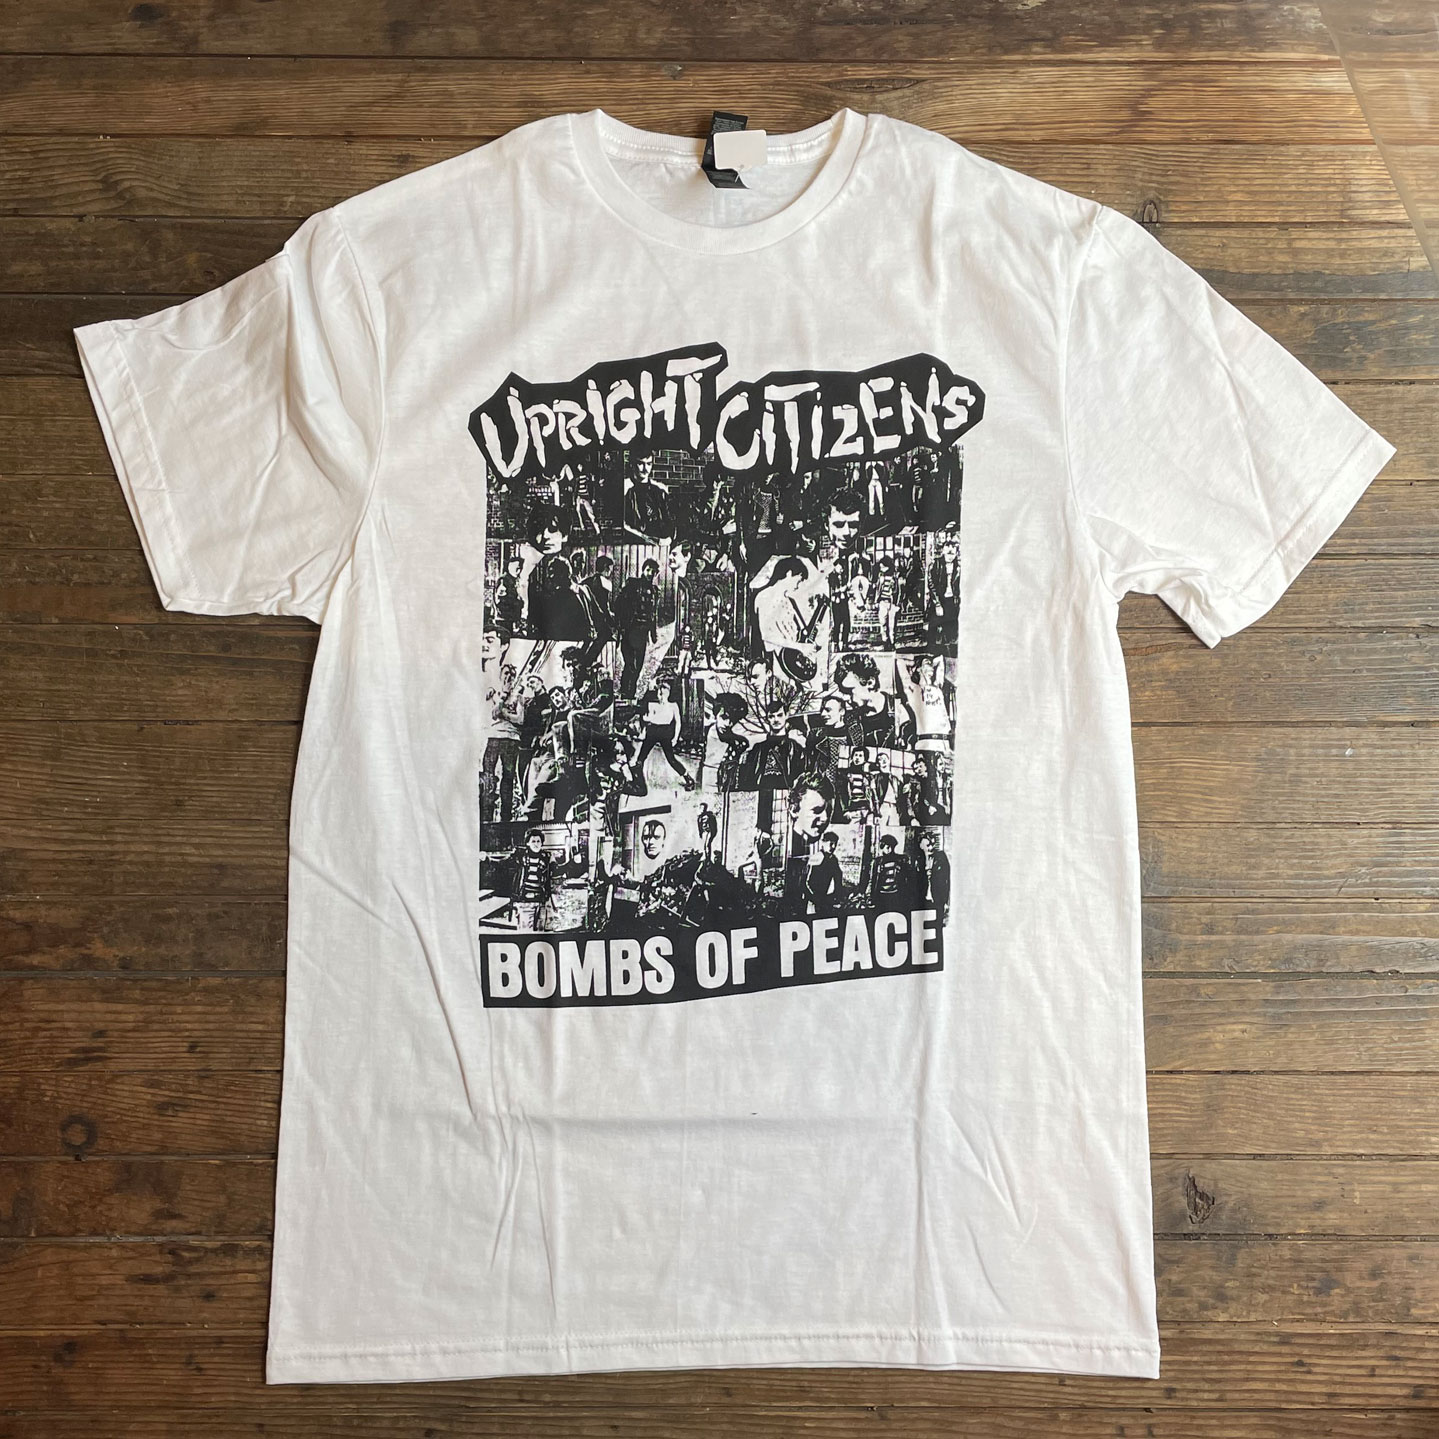 UPRIGHT CITIZENS Tシャツ BOMB OF PEACE